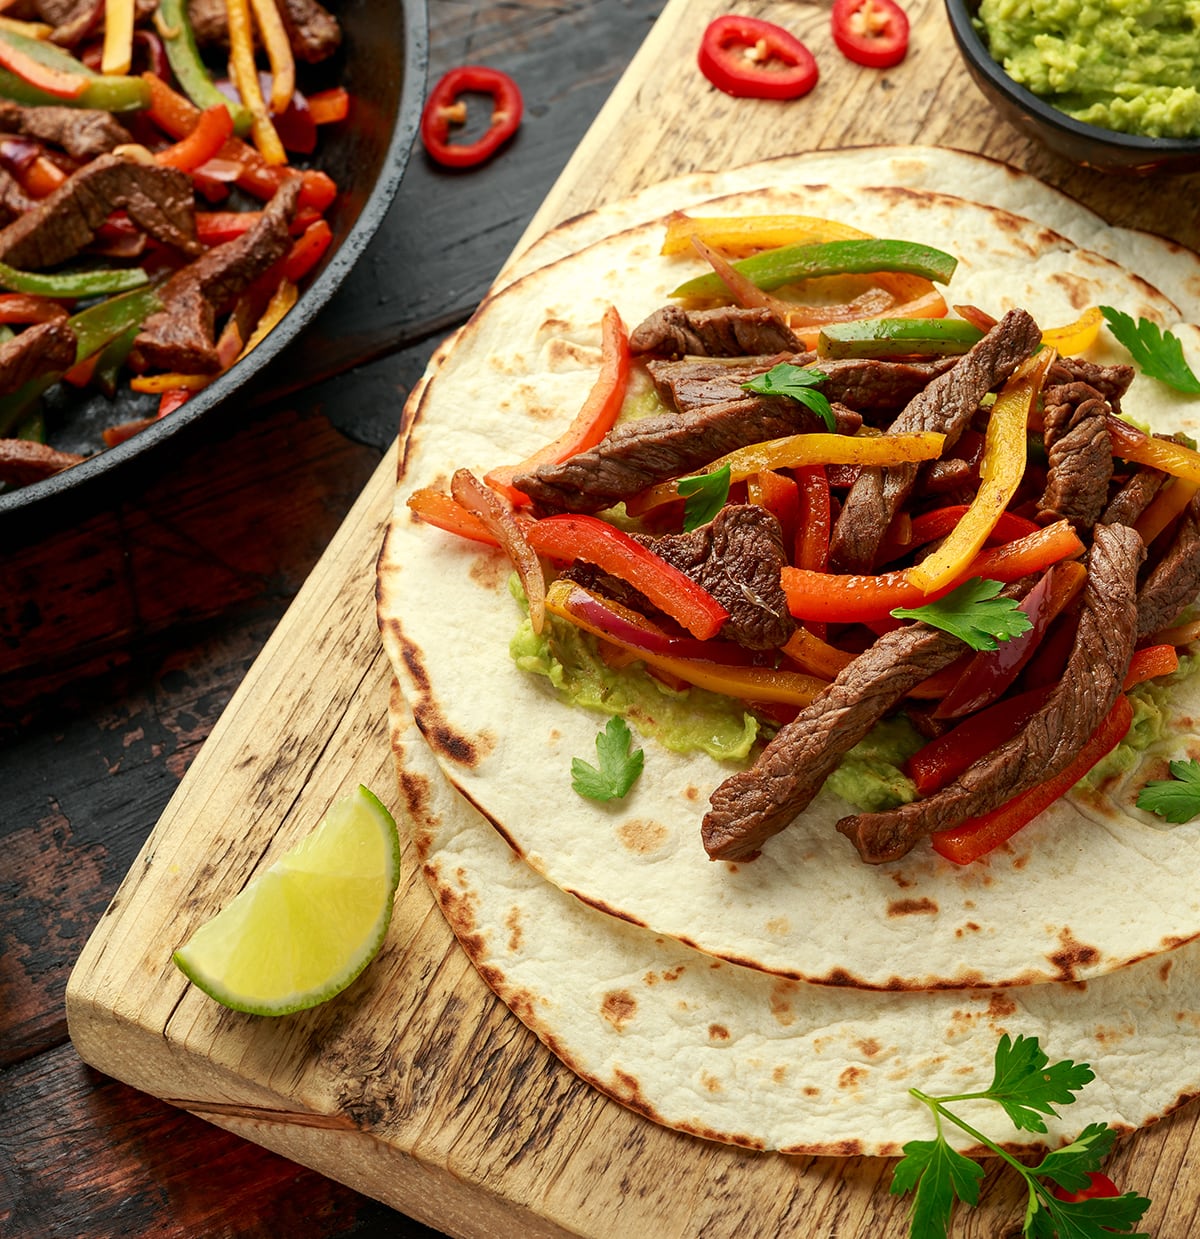 Beef steak fajitas with chopped peppers in a grilled tortilla.